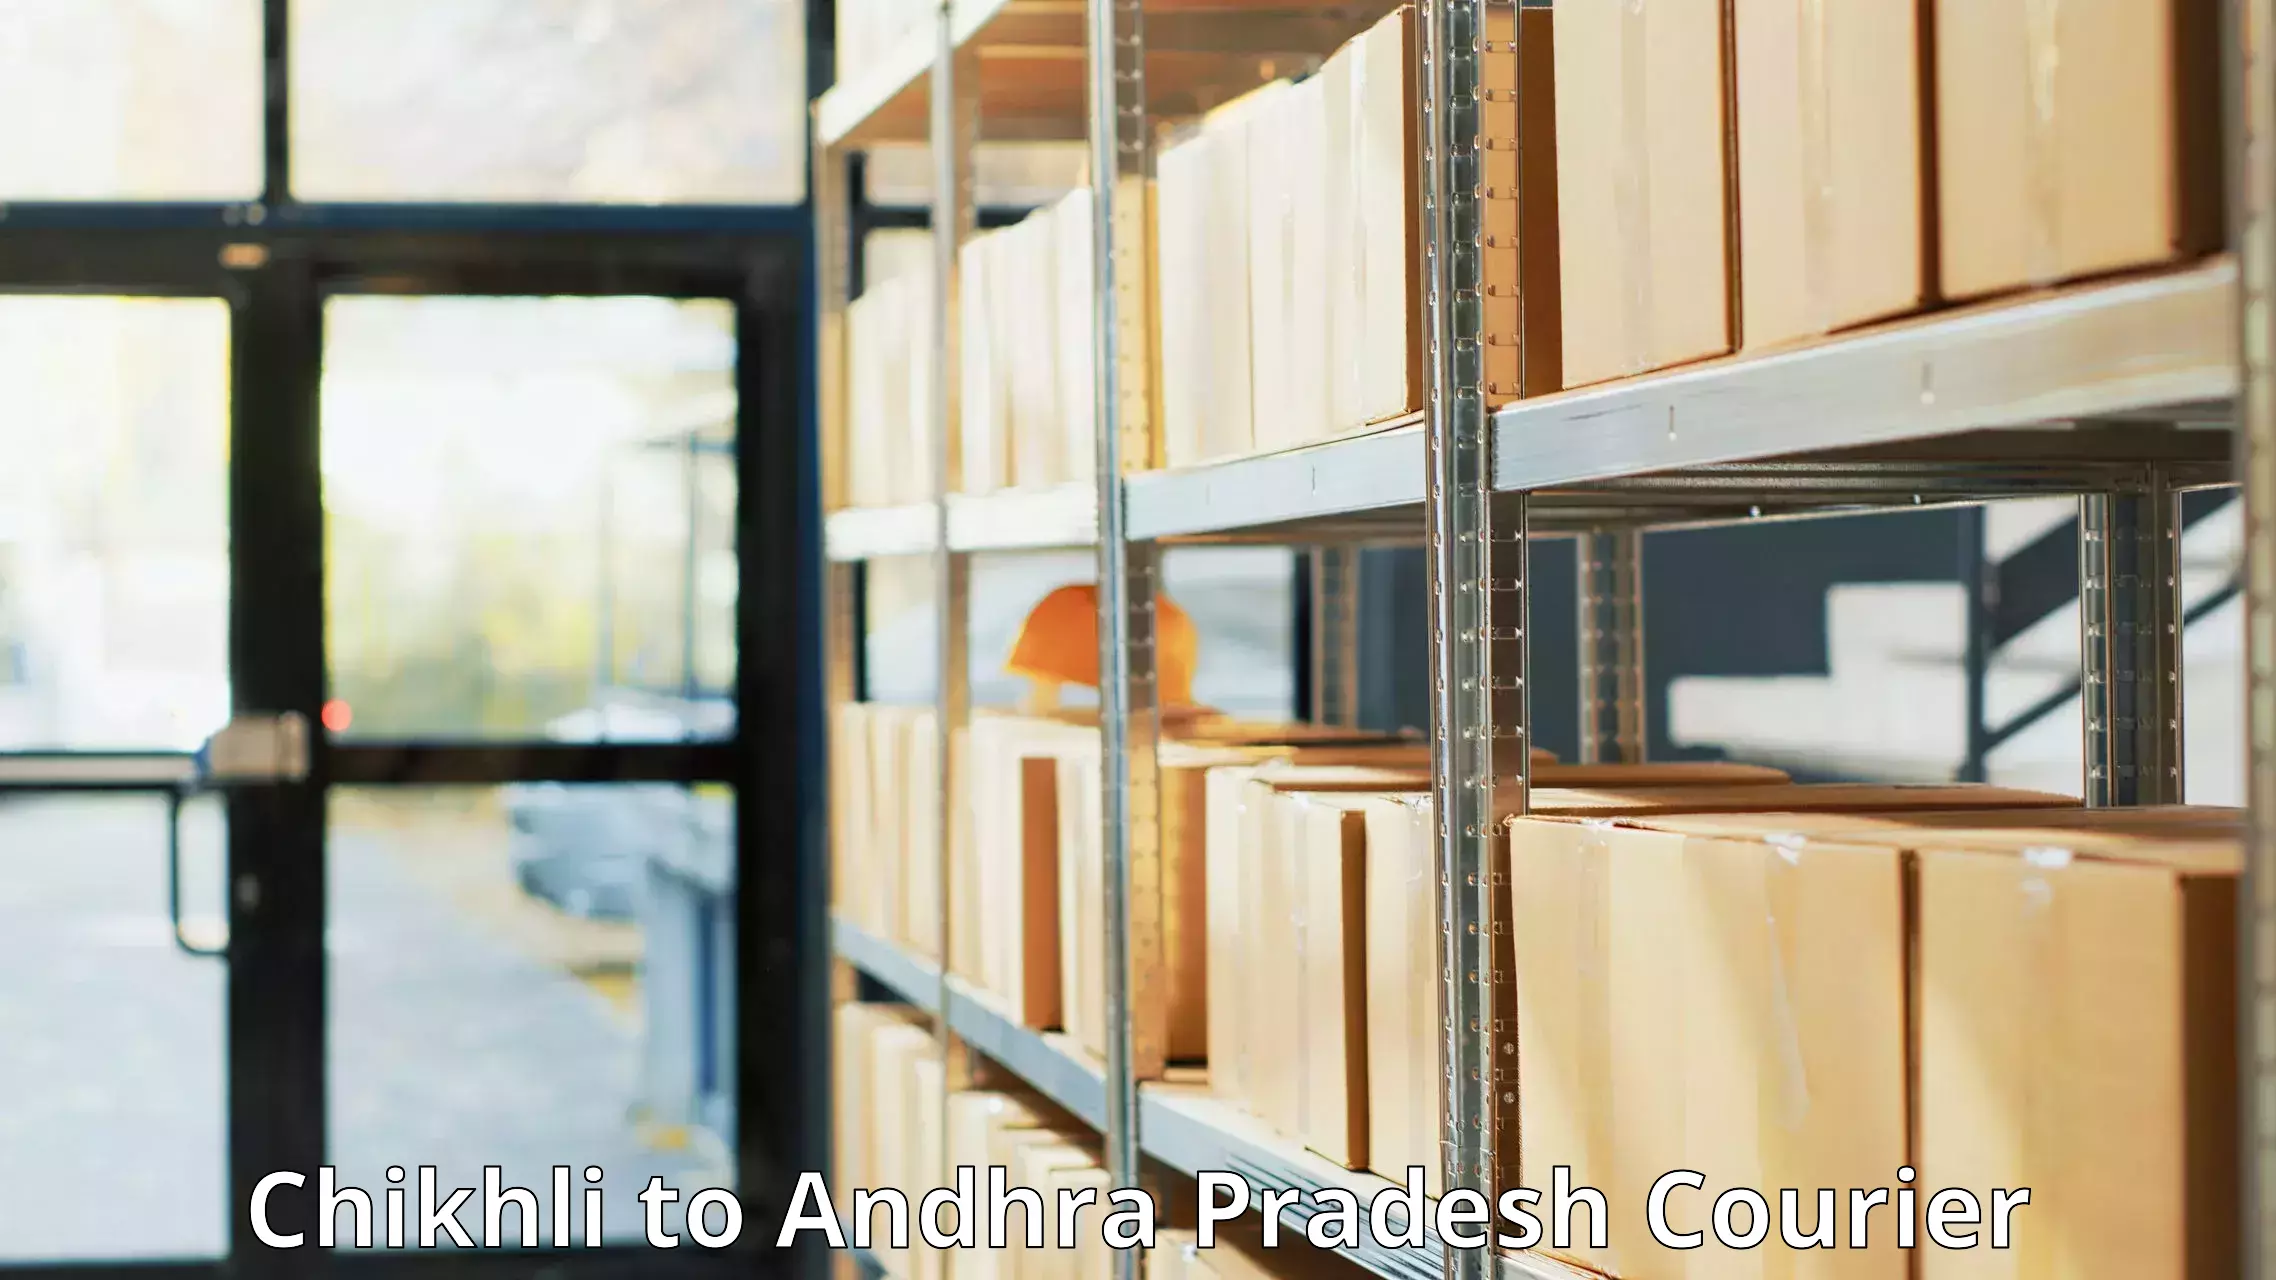 Professional courier services Chikhli to Visakhapatnam Port